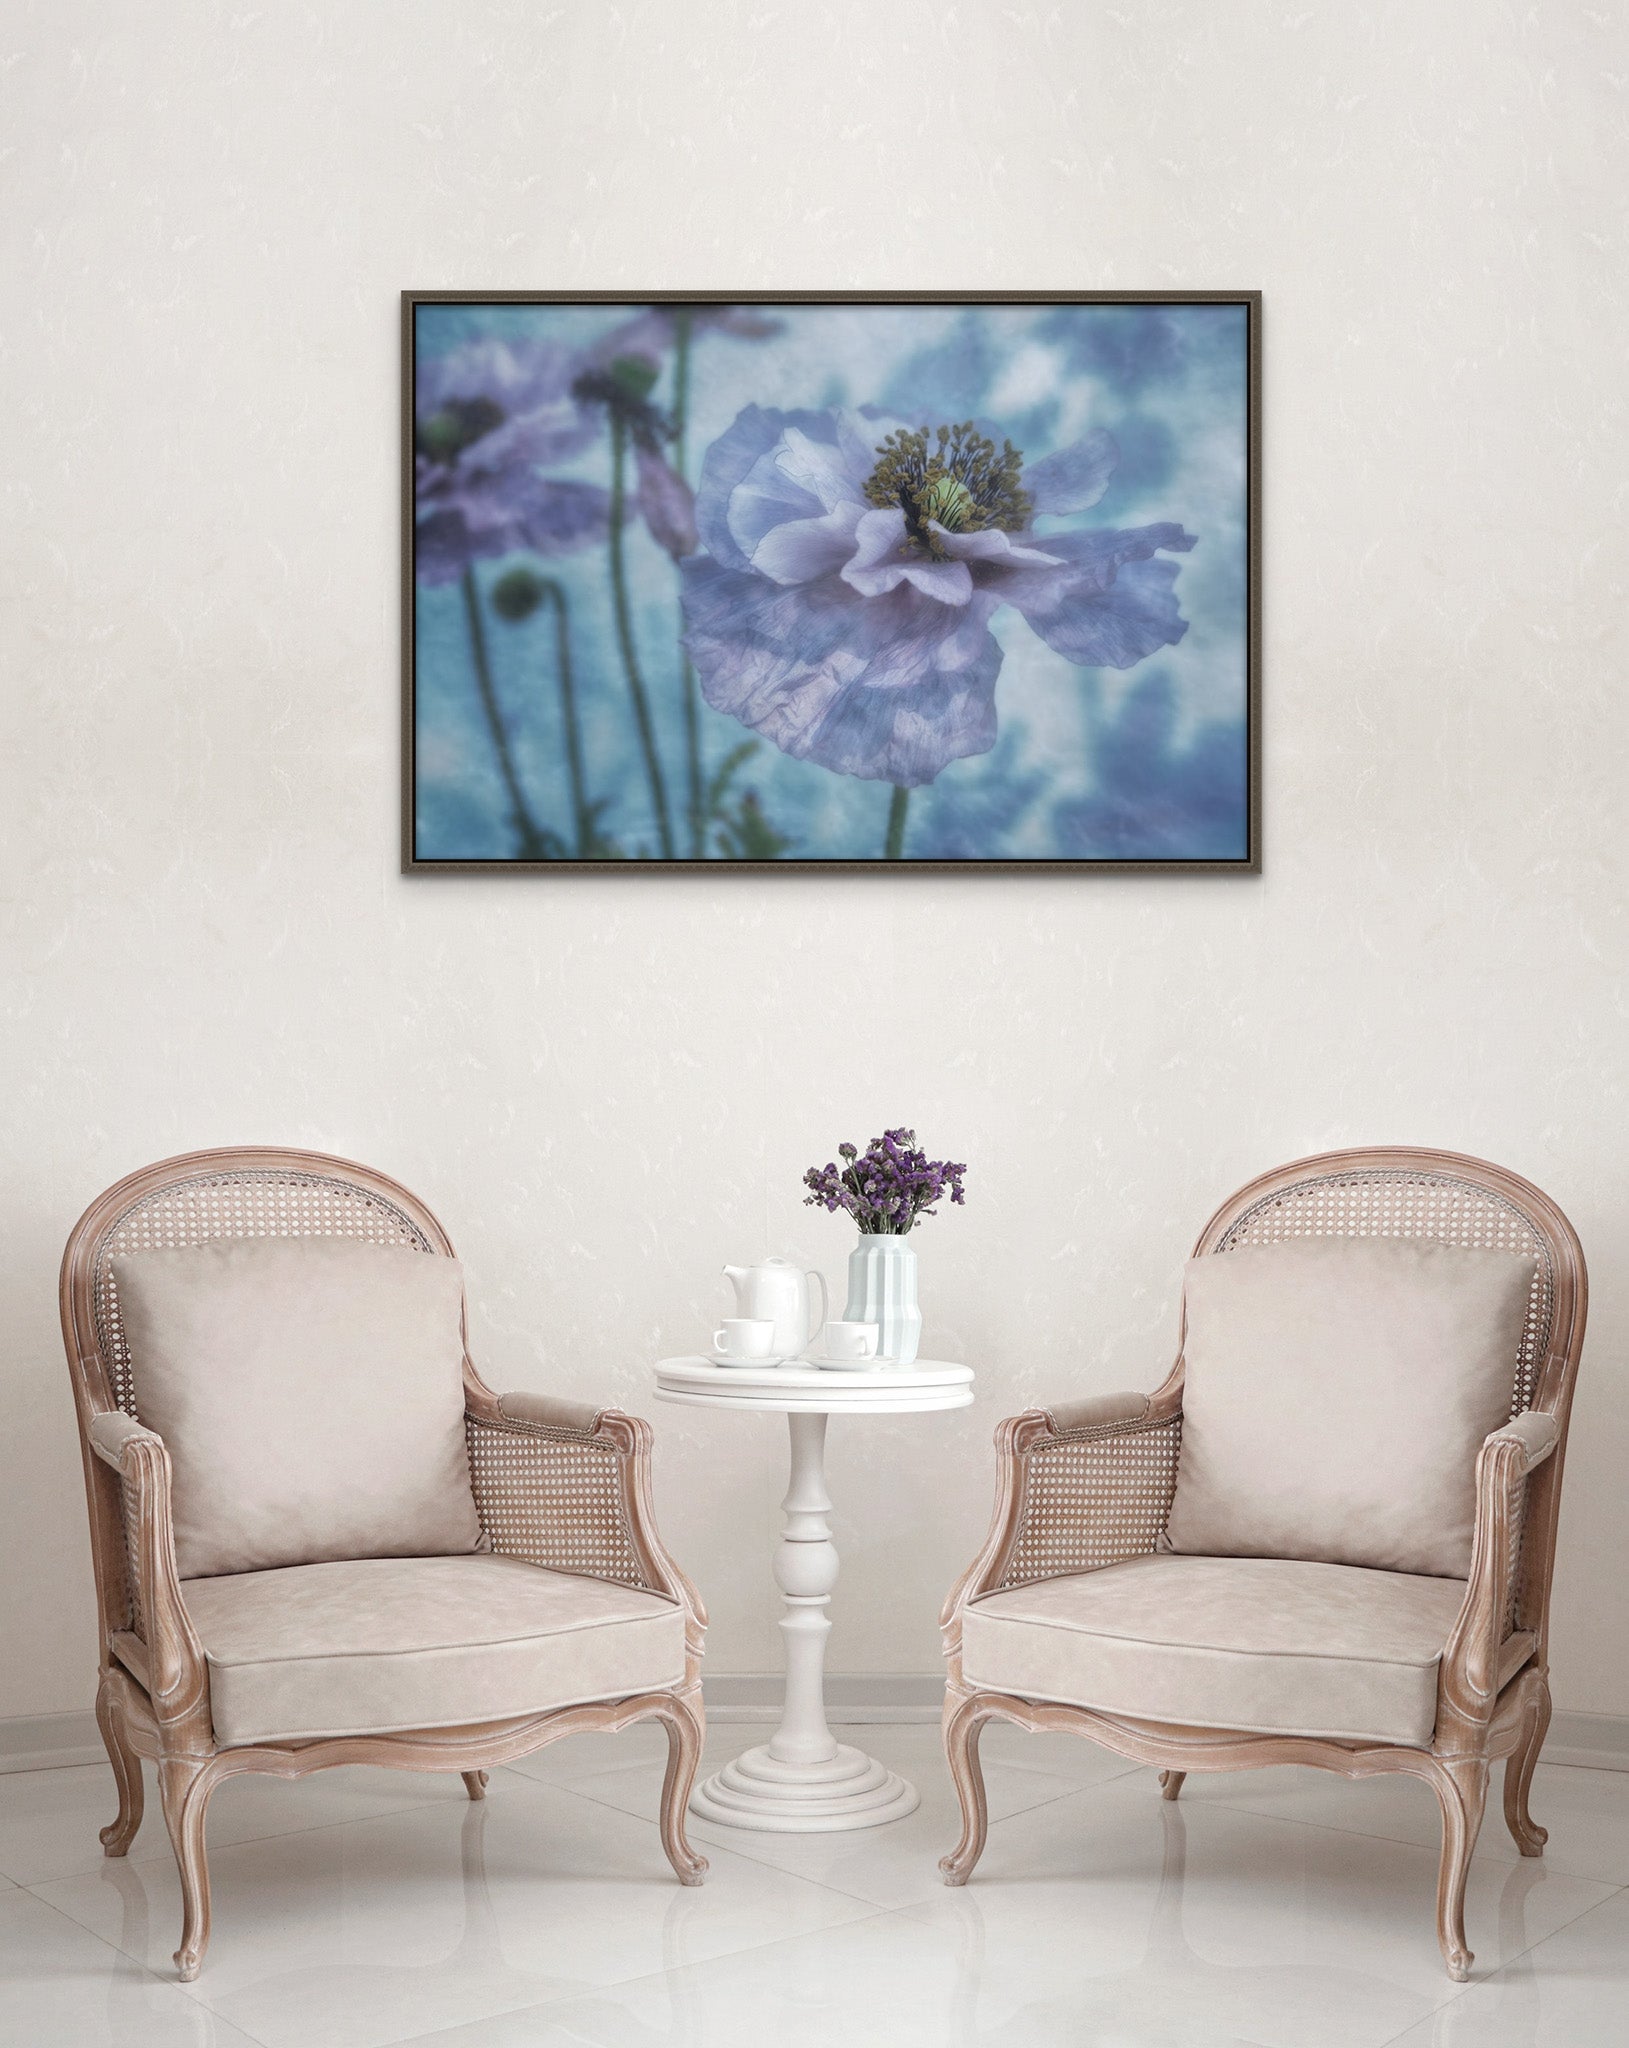 Room with two chairs. There is picture in a floating frame on the wall. The picture is a metal print of "Ethereal Beauty" by Cameron Dreaux of Dreaux Fine Art. The print is a photograph of blue poppies. 